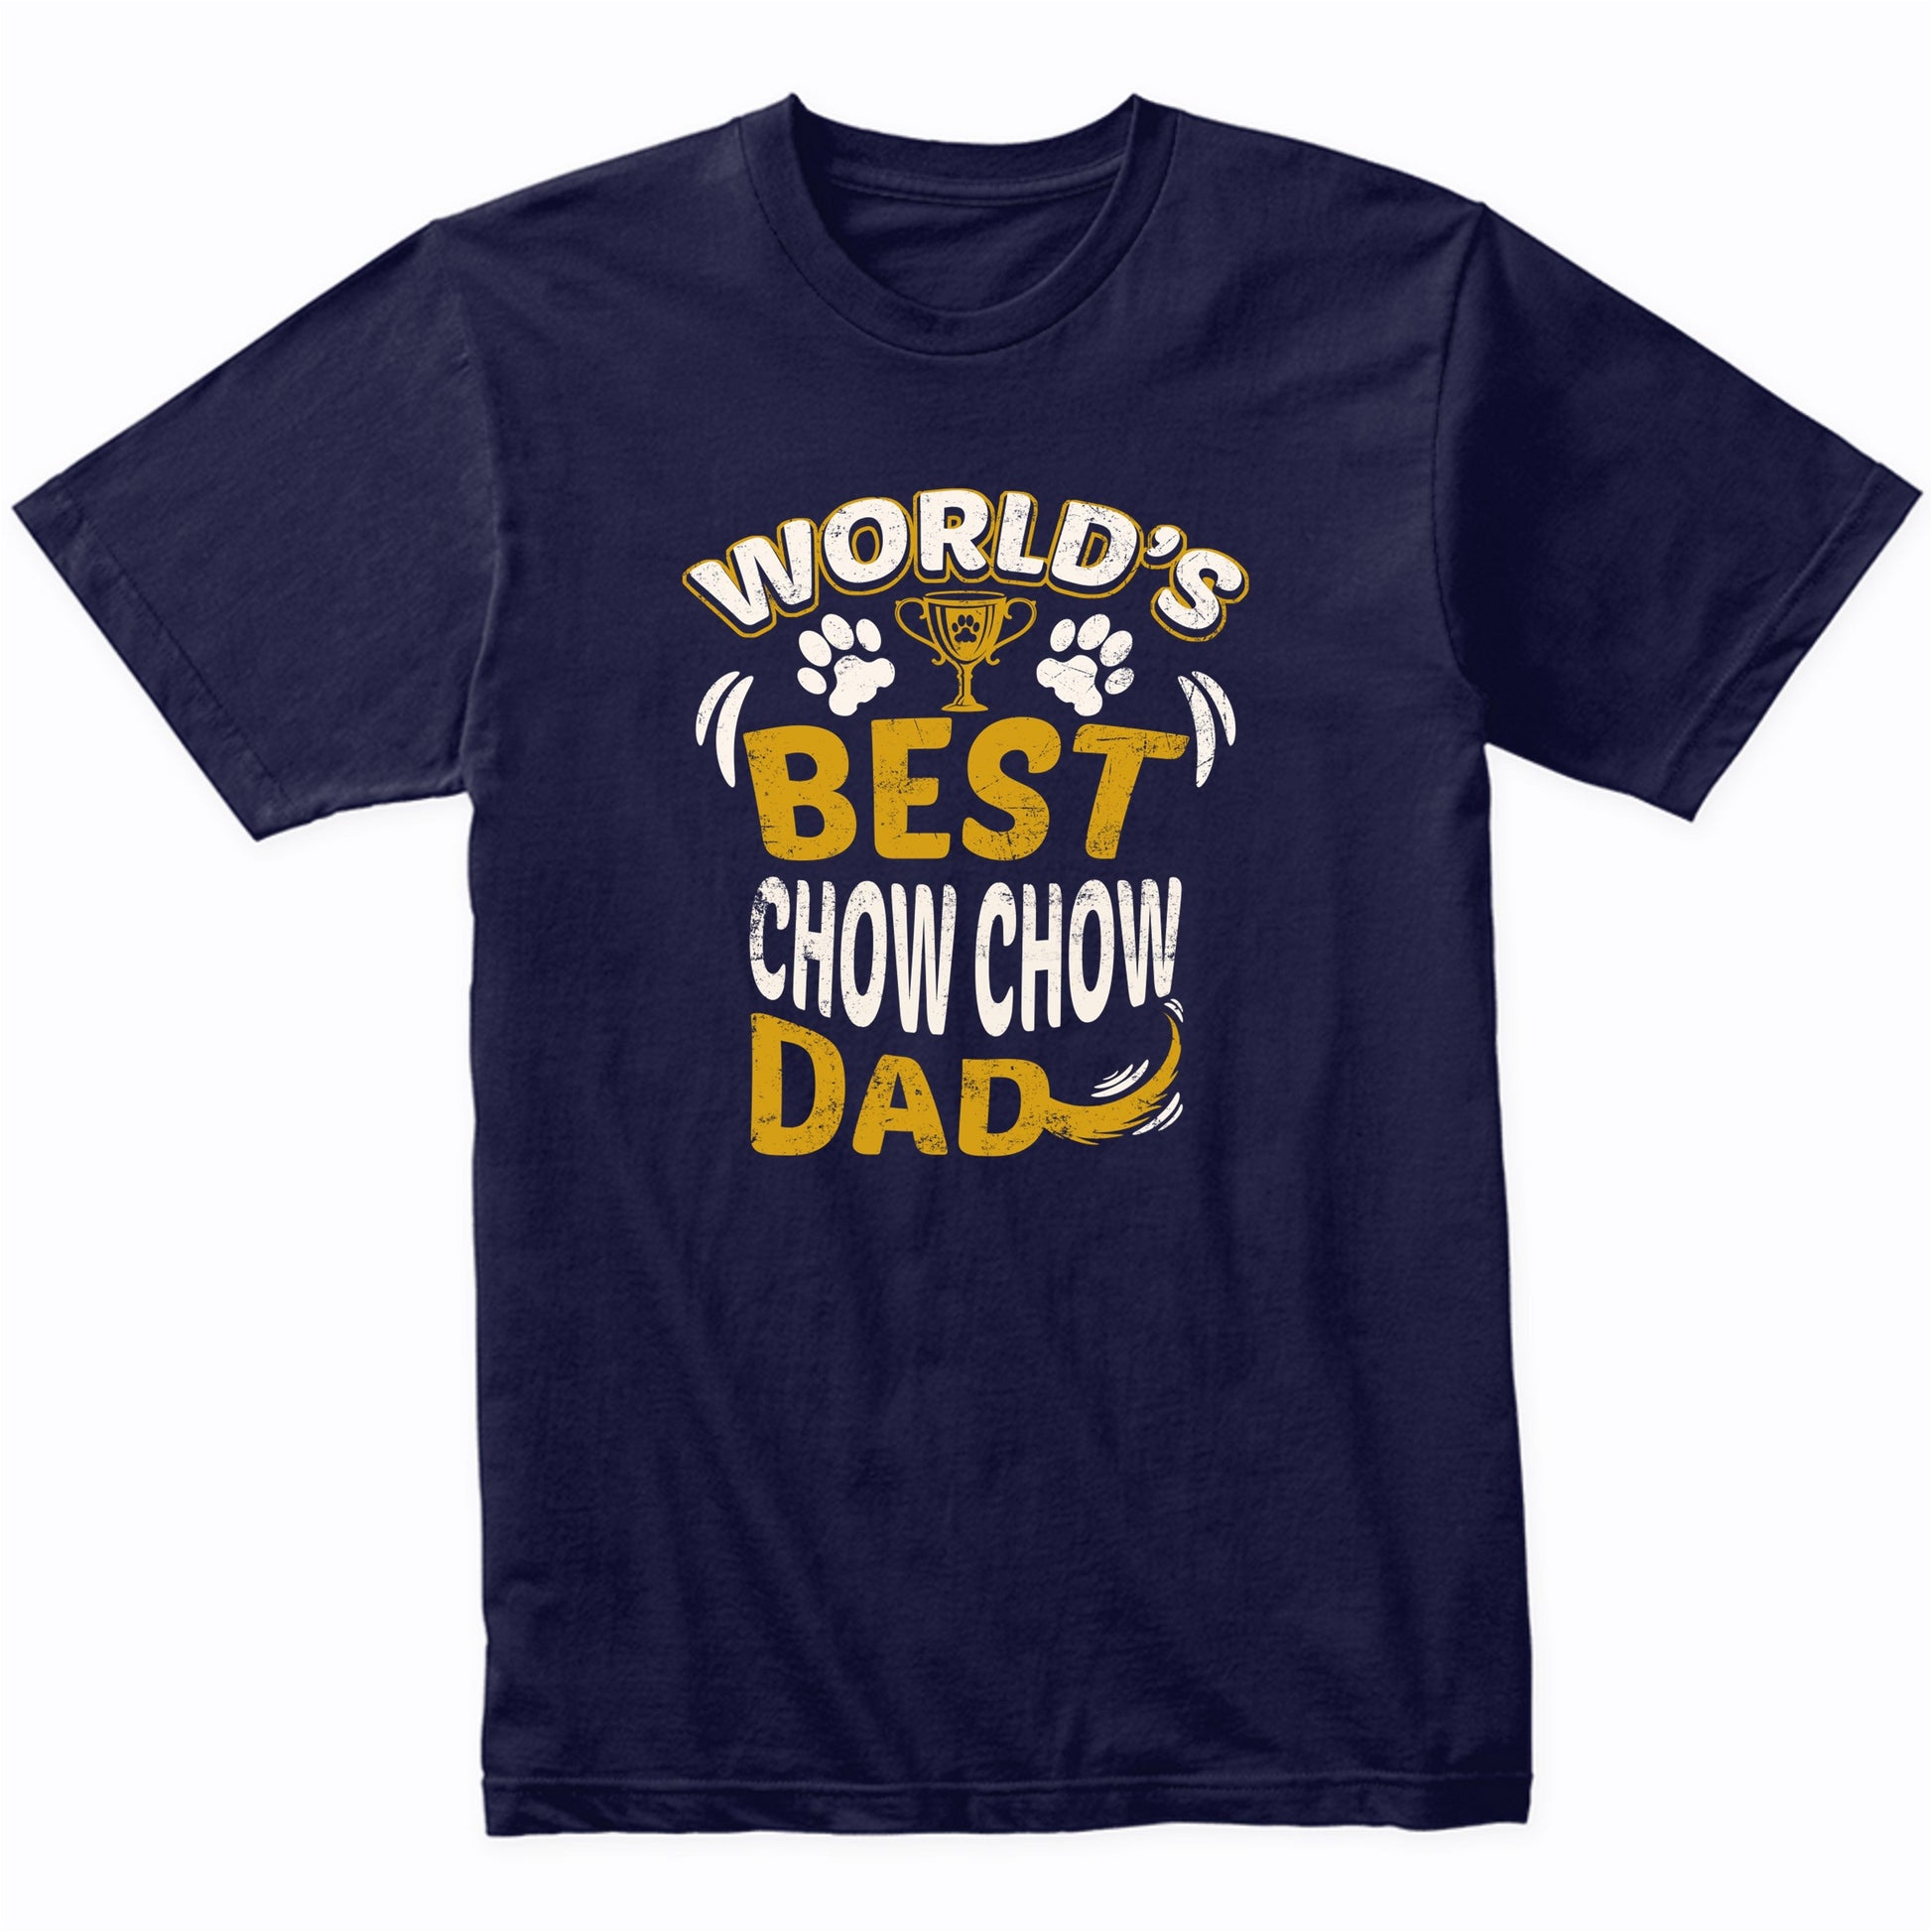 World's Best Chow Chow Dad Graphic T-Shirt